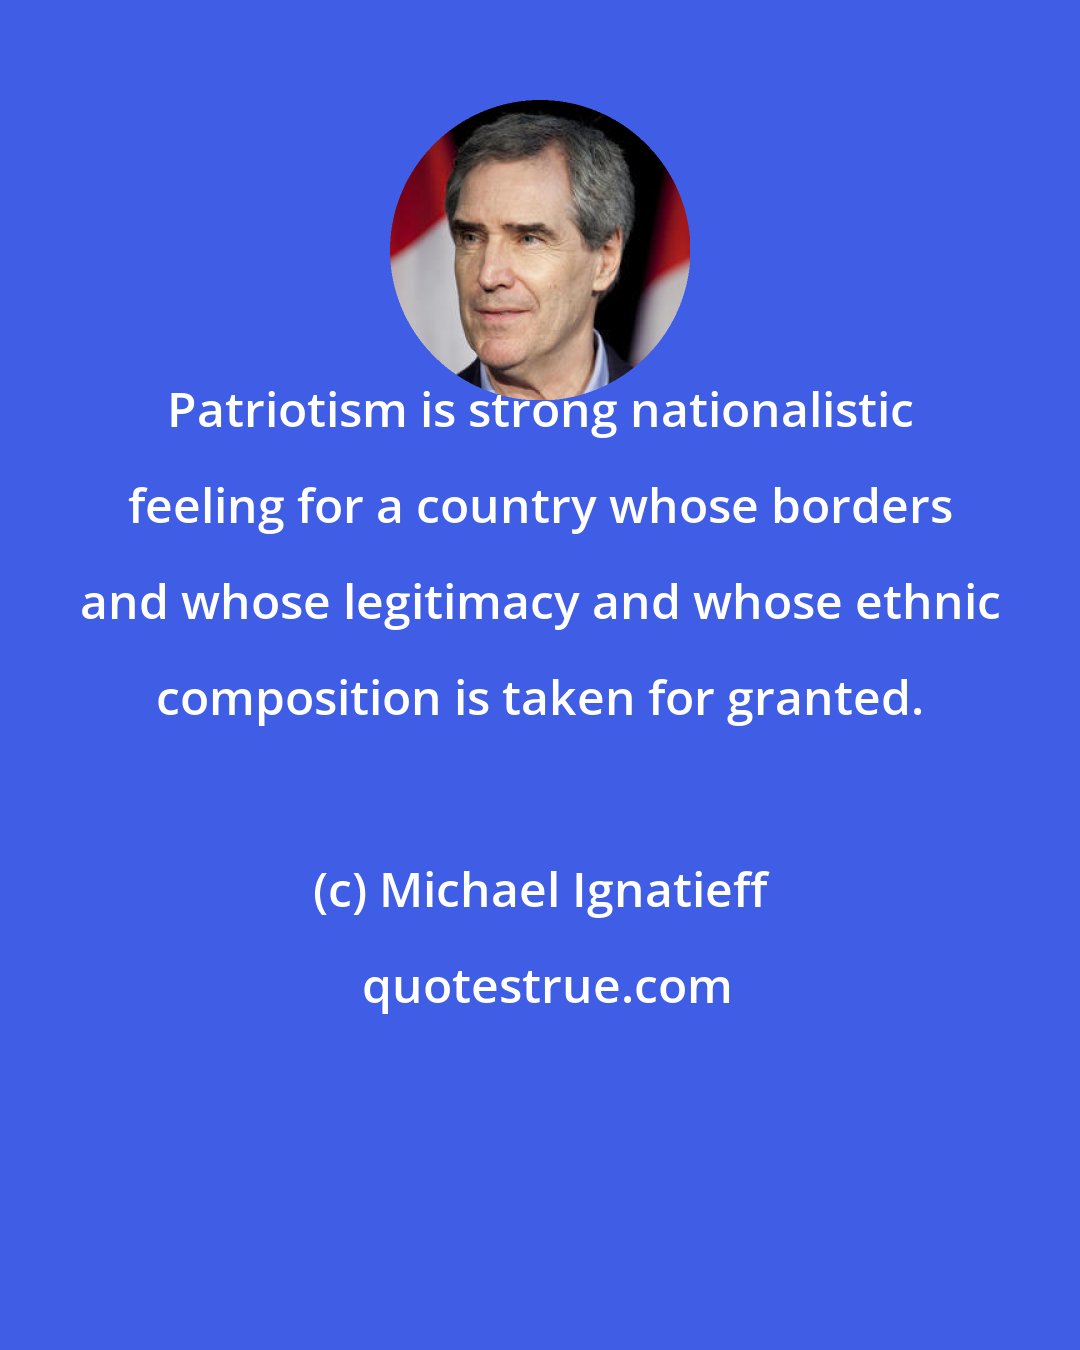 Michael Ignatieff: Patriotism is strong nationalistic feeling for a country whose borders and whose legitimacy and whose ethnic composition is taken for granted.